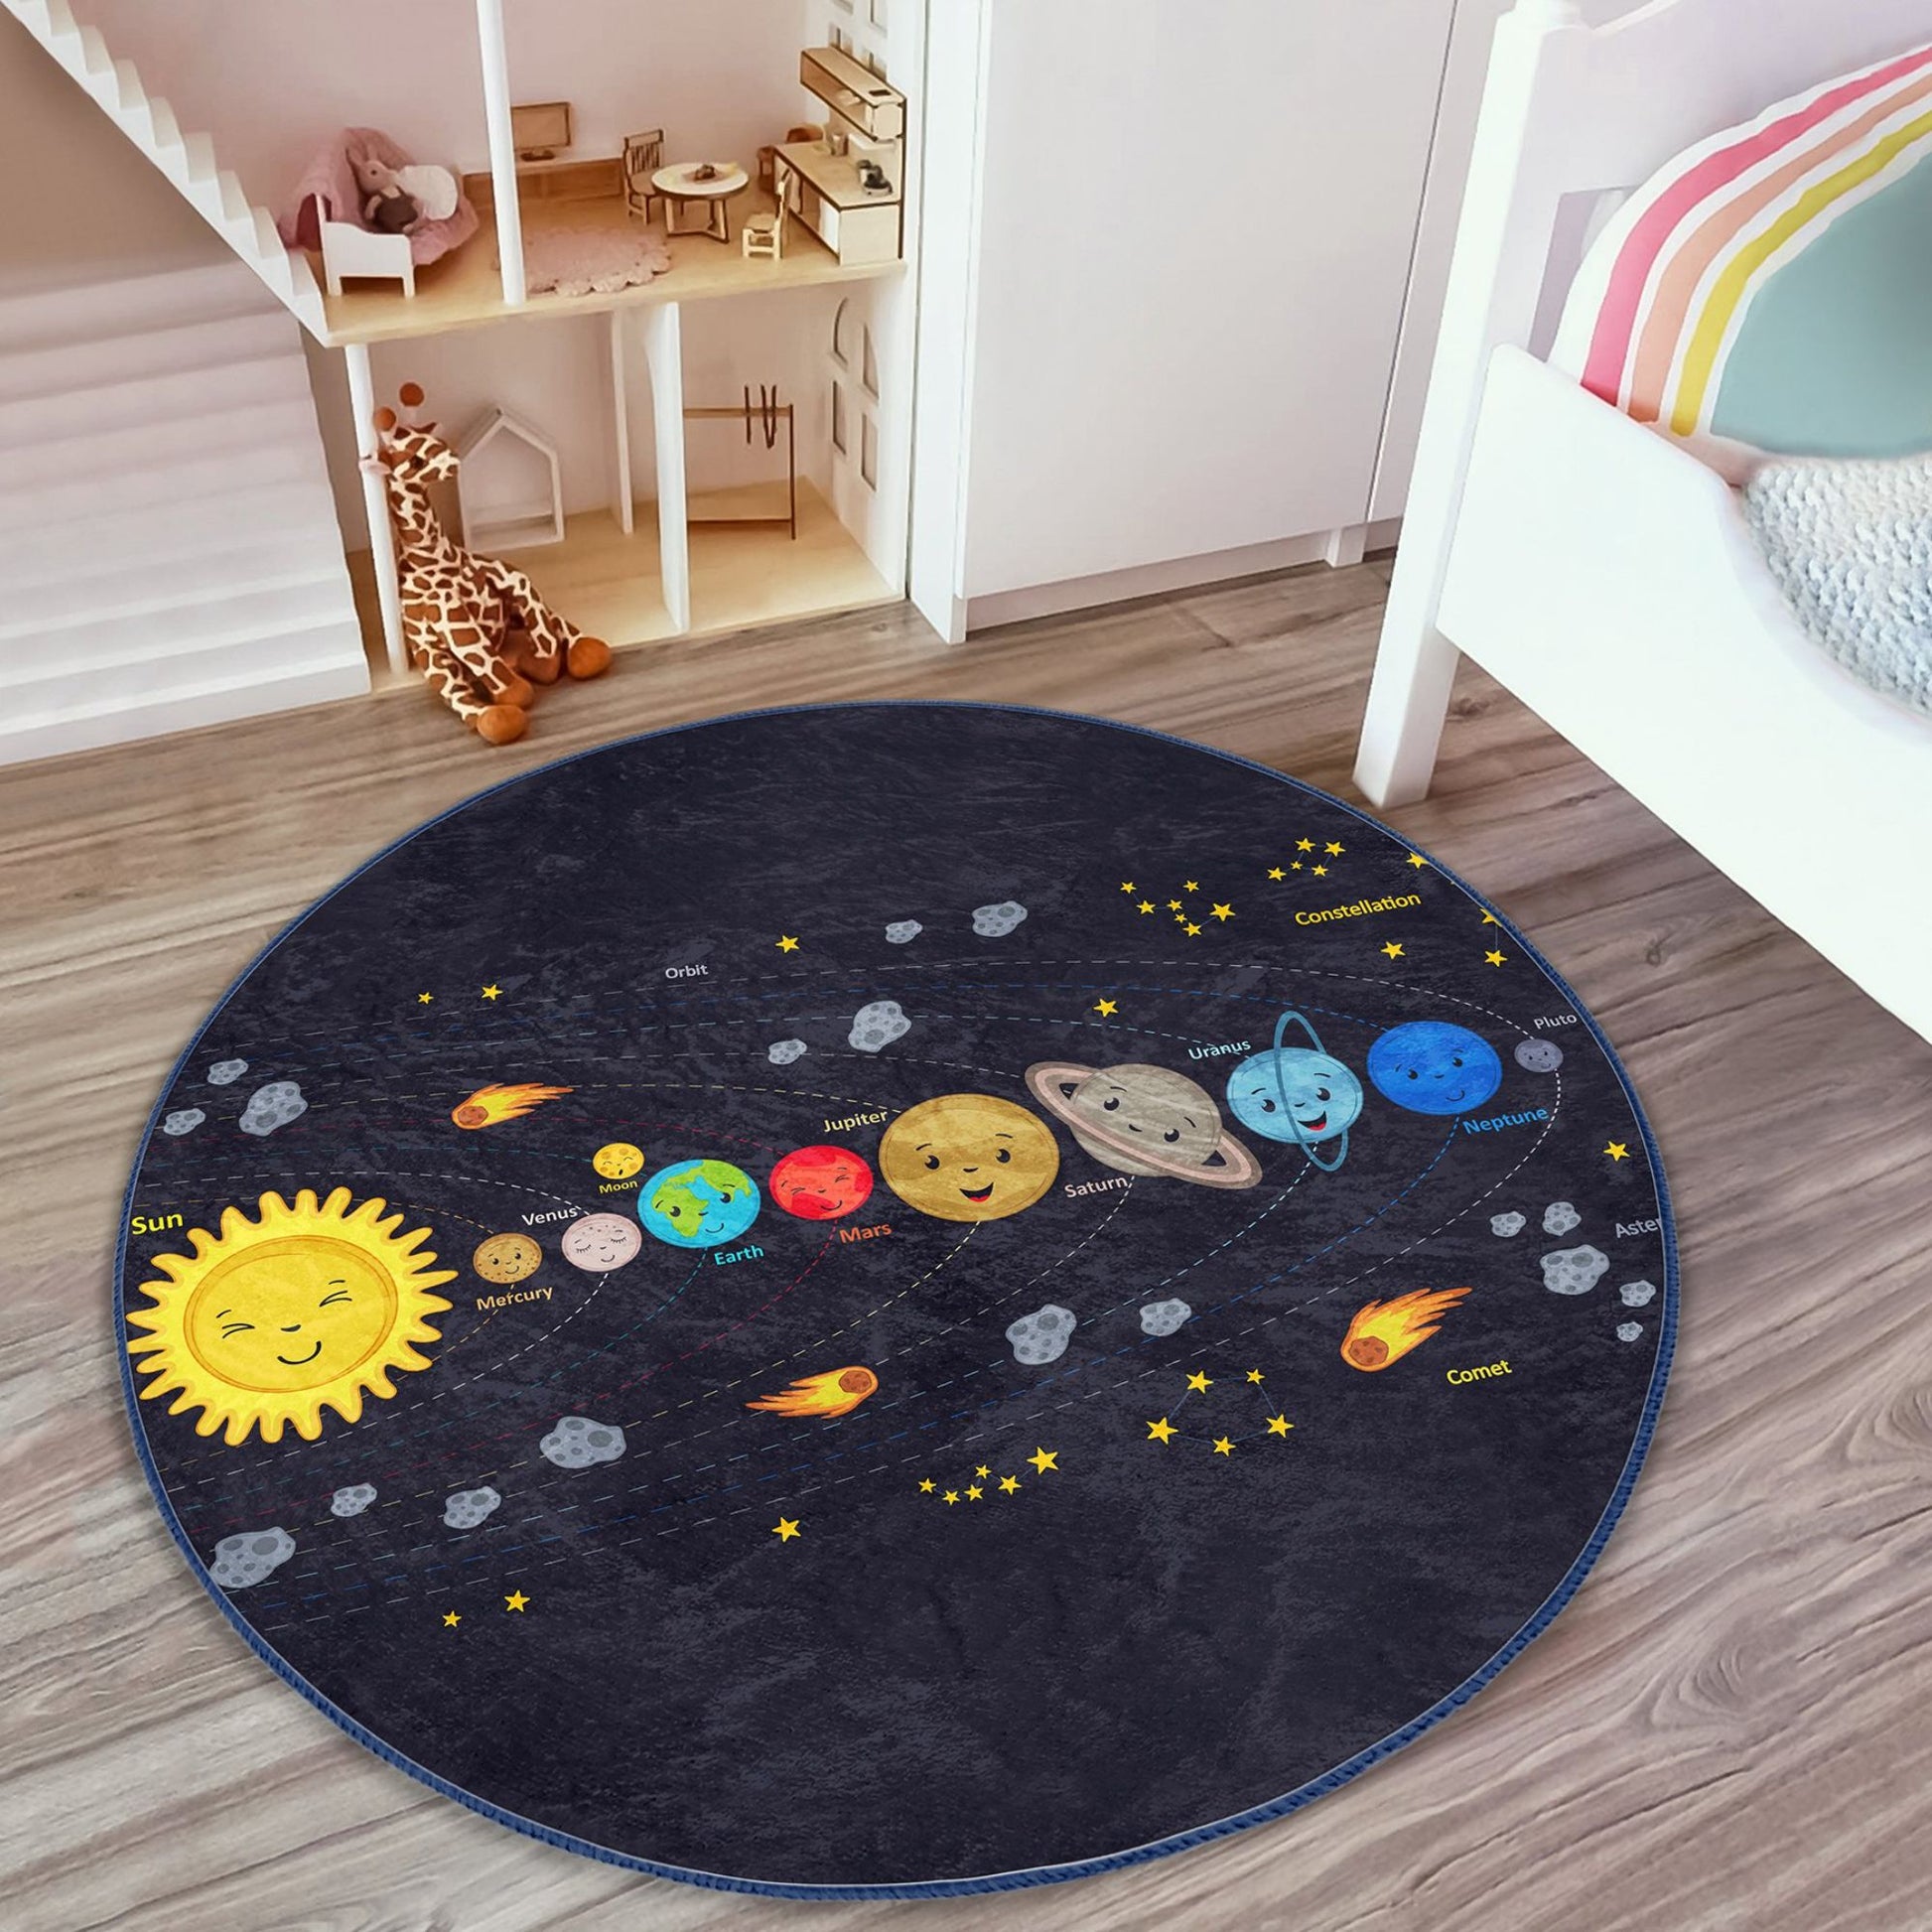 Homeezone's Planets in Our Solar System Kids' Room Washable Rug